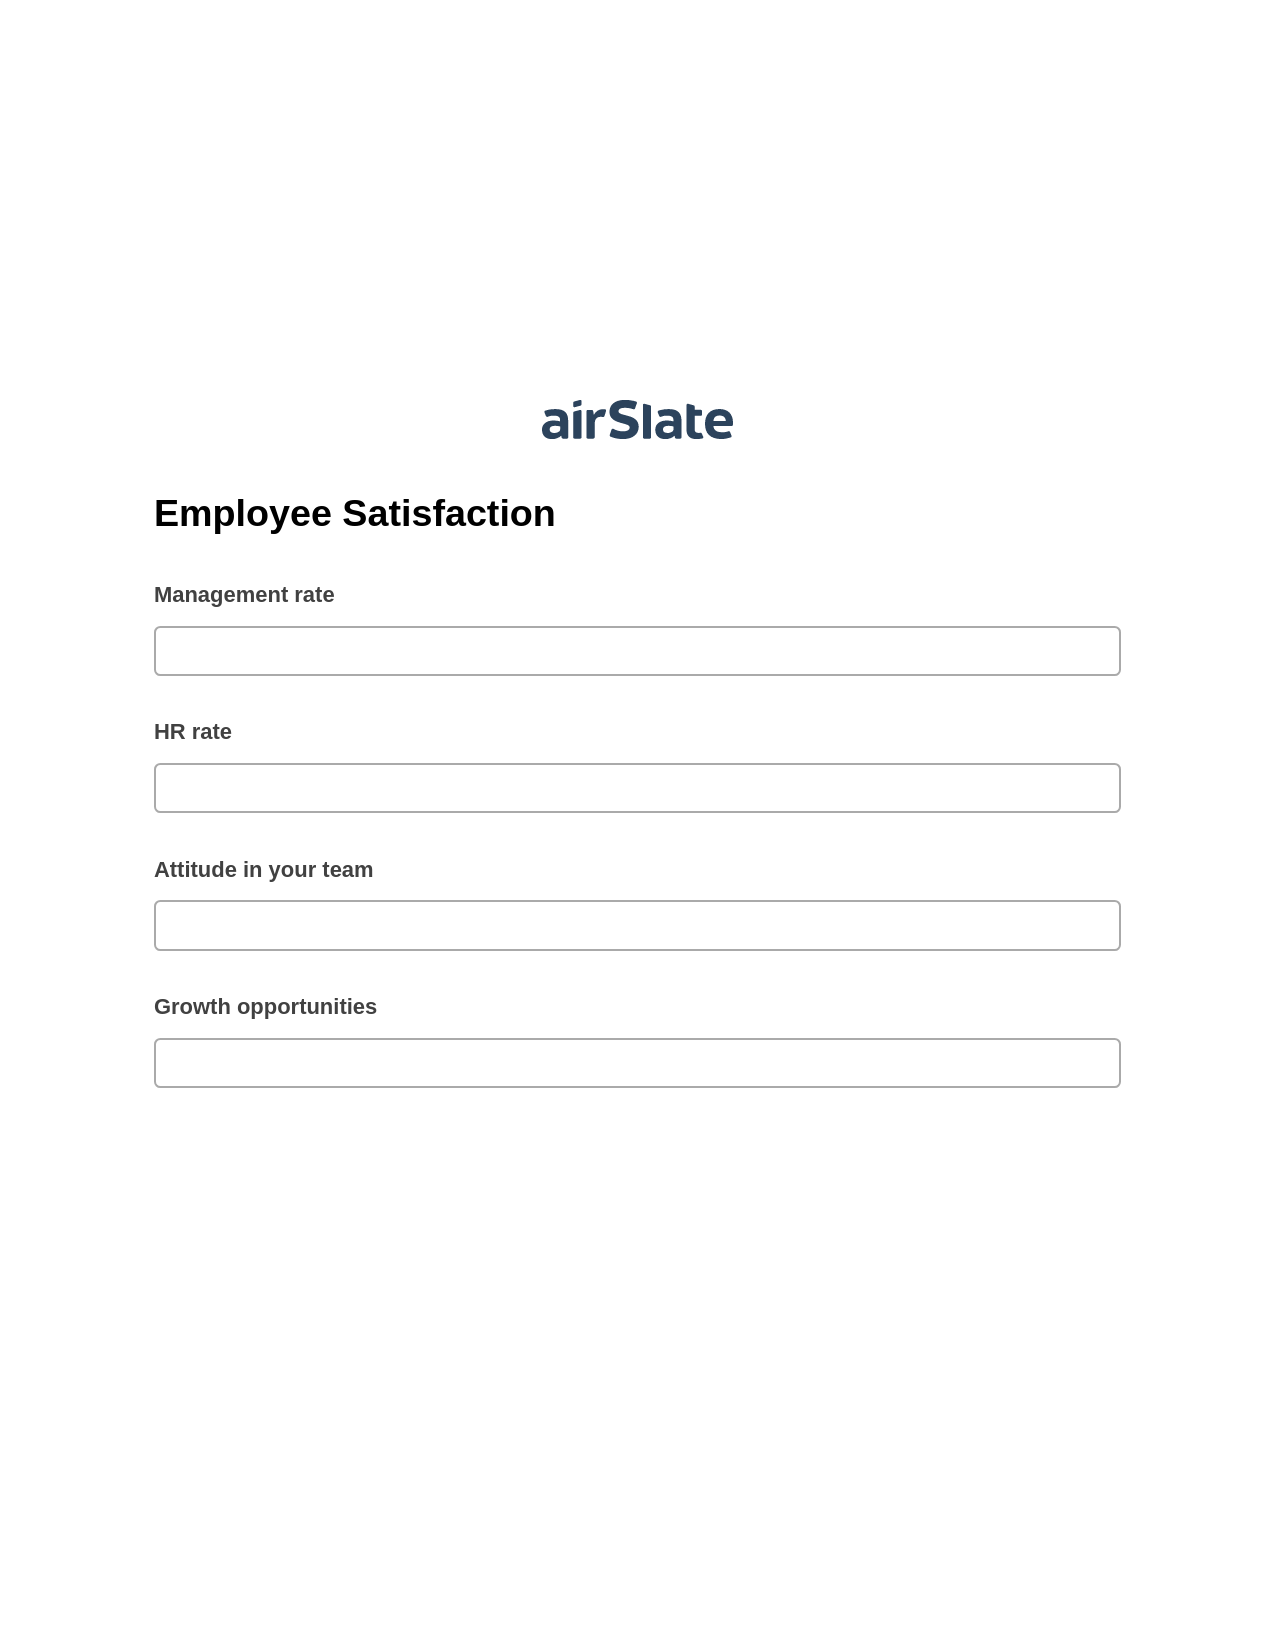 Employee Satisfaction Pre-fill from CSV File Bot, Update MS Dynamics 365 Records Bot, Text Message Notification Postfinish Bot